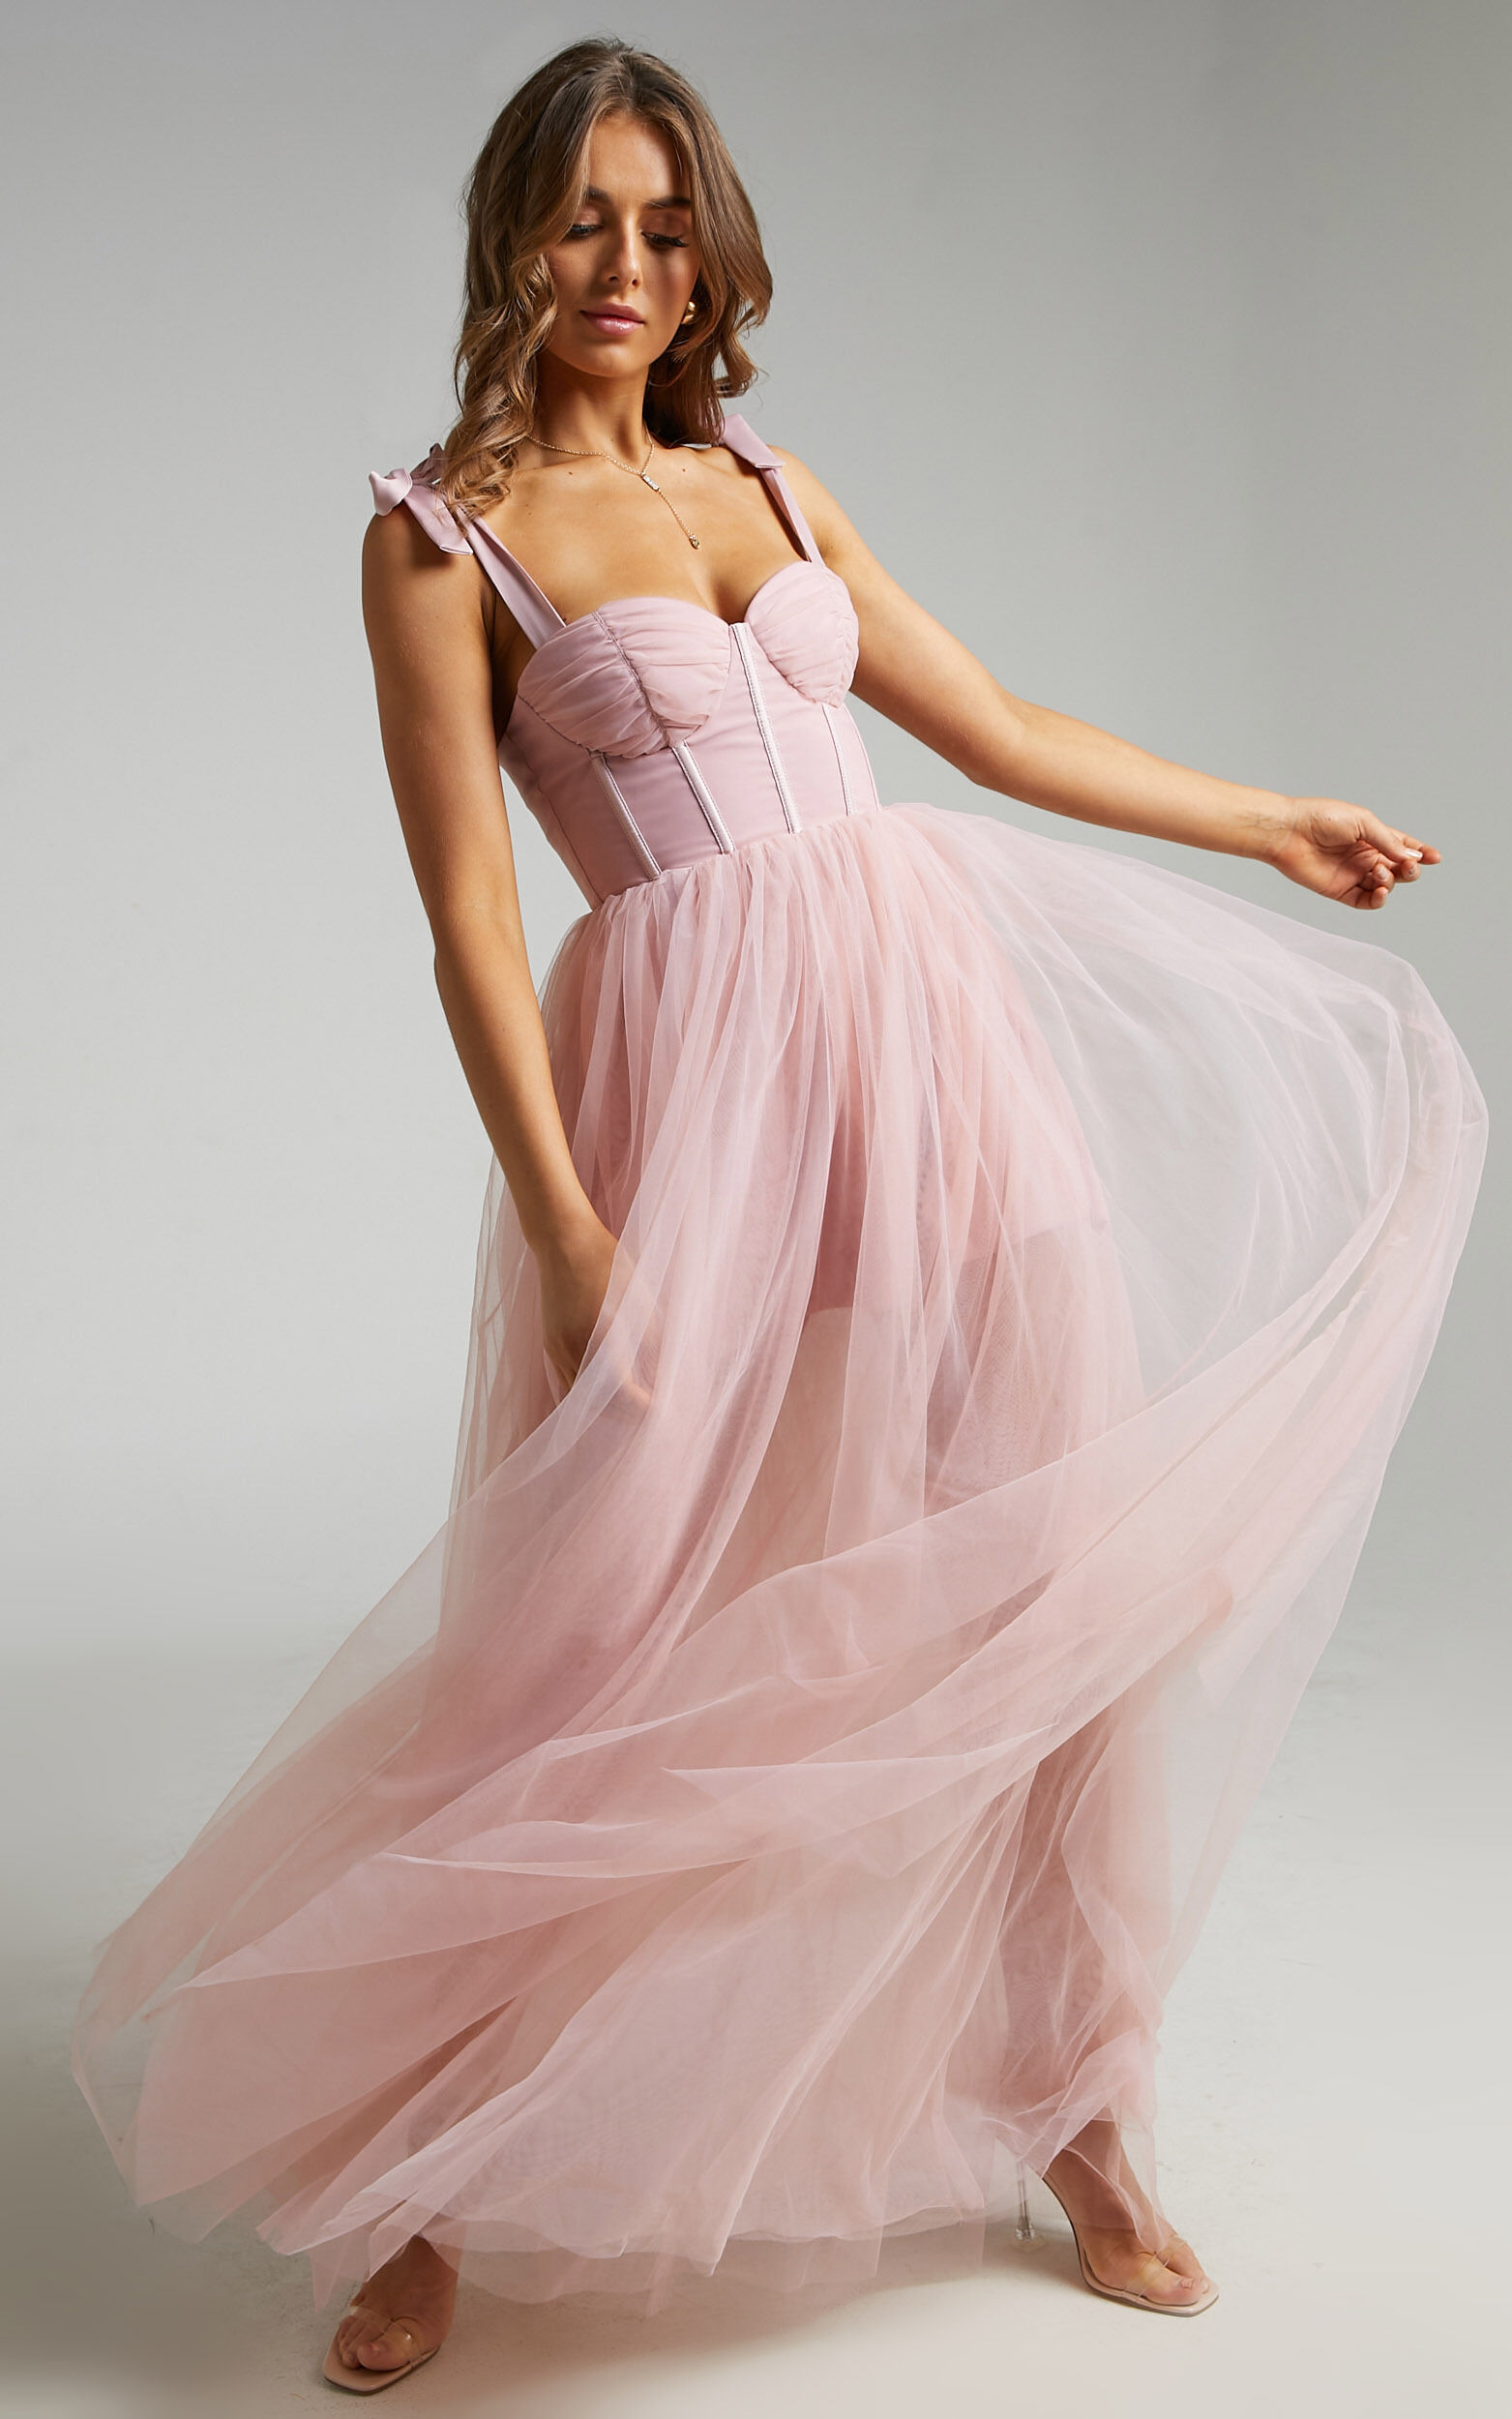 Emmary Gown - Bustier Bodice Tulle Gown in Pink - 06, PNK2